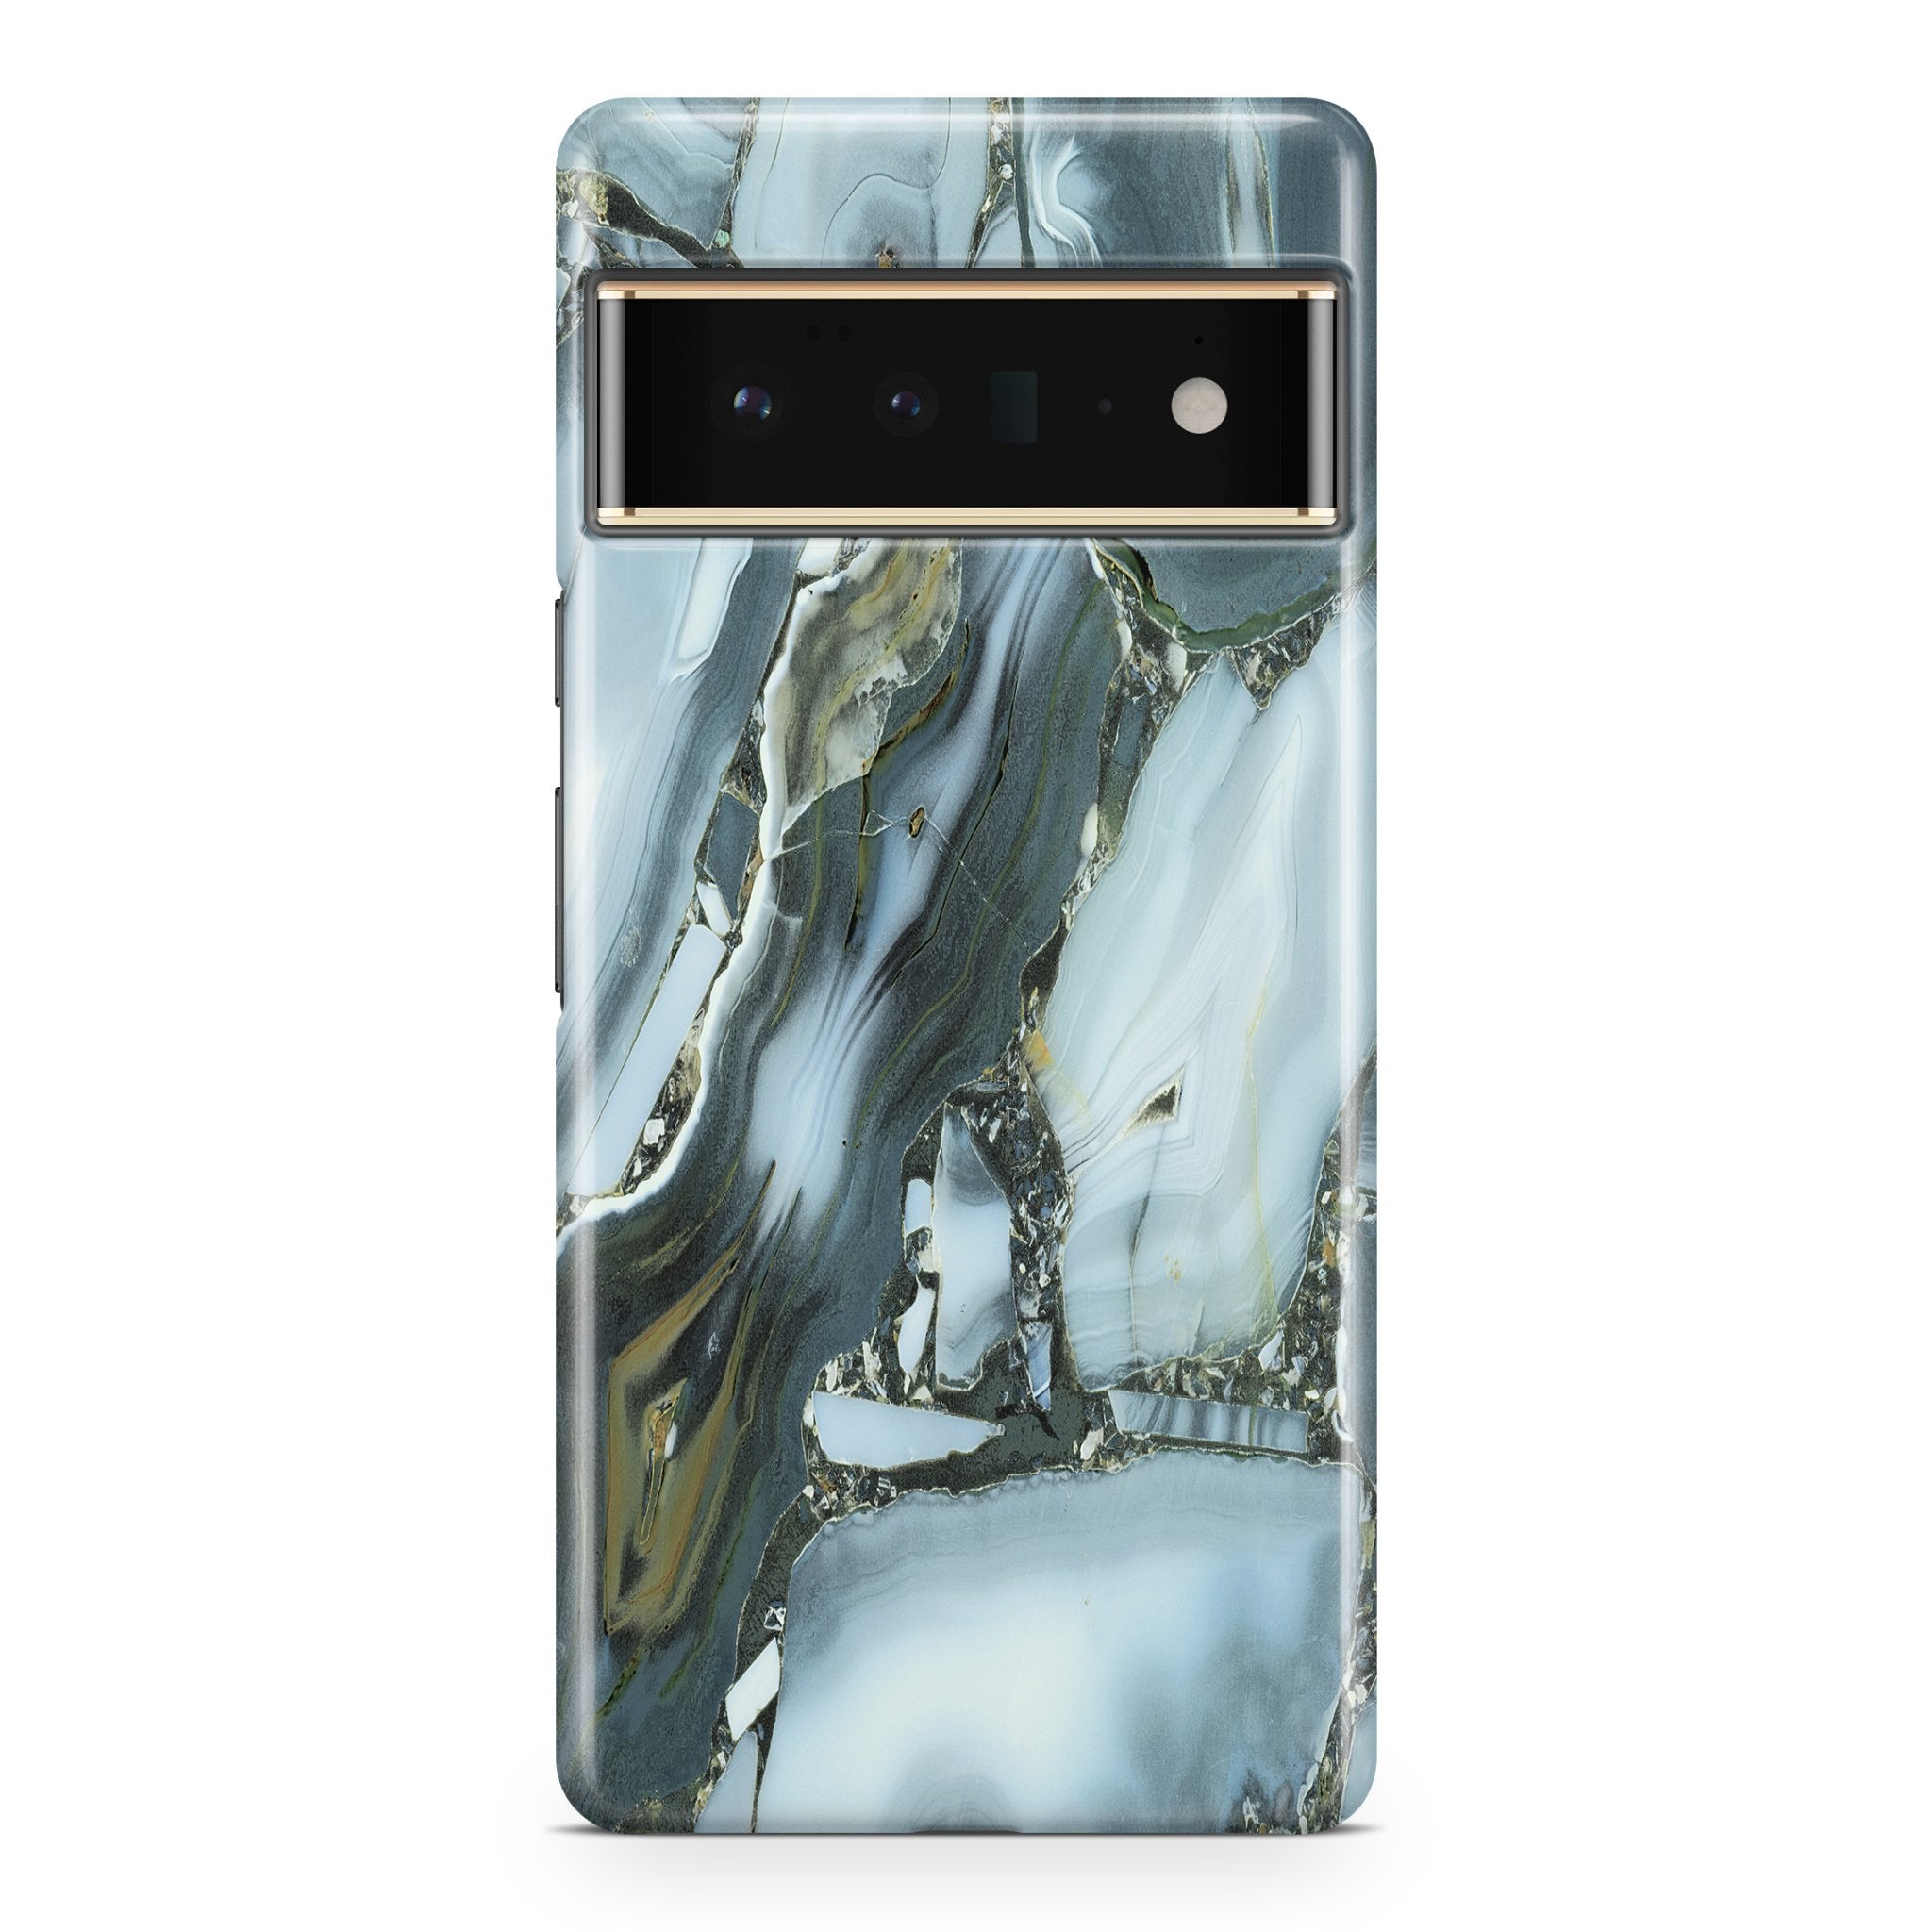 Blue Grey Agate - Google phone case designs by CaseSwagger